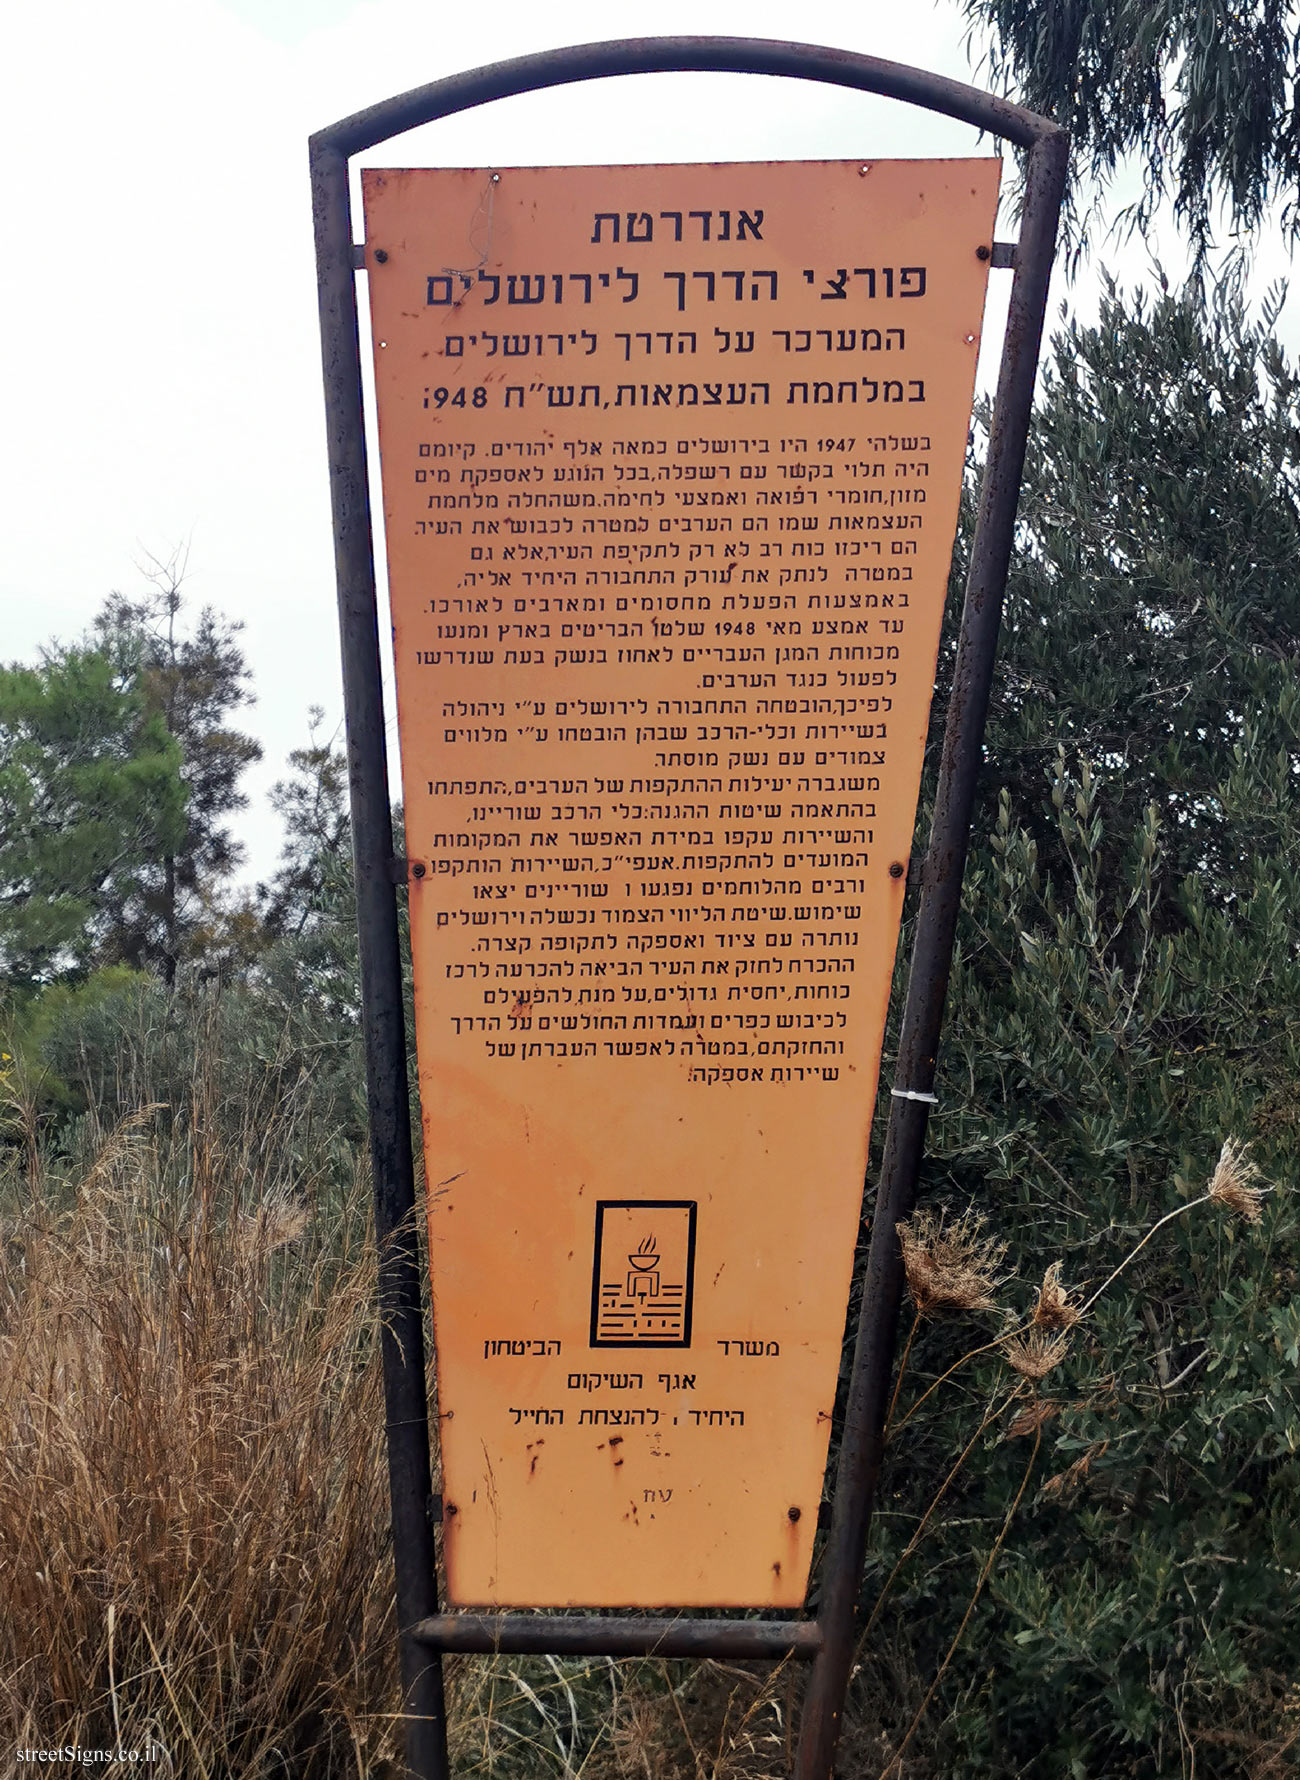 A monument in memory of those who opened the road to Jerusalem